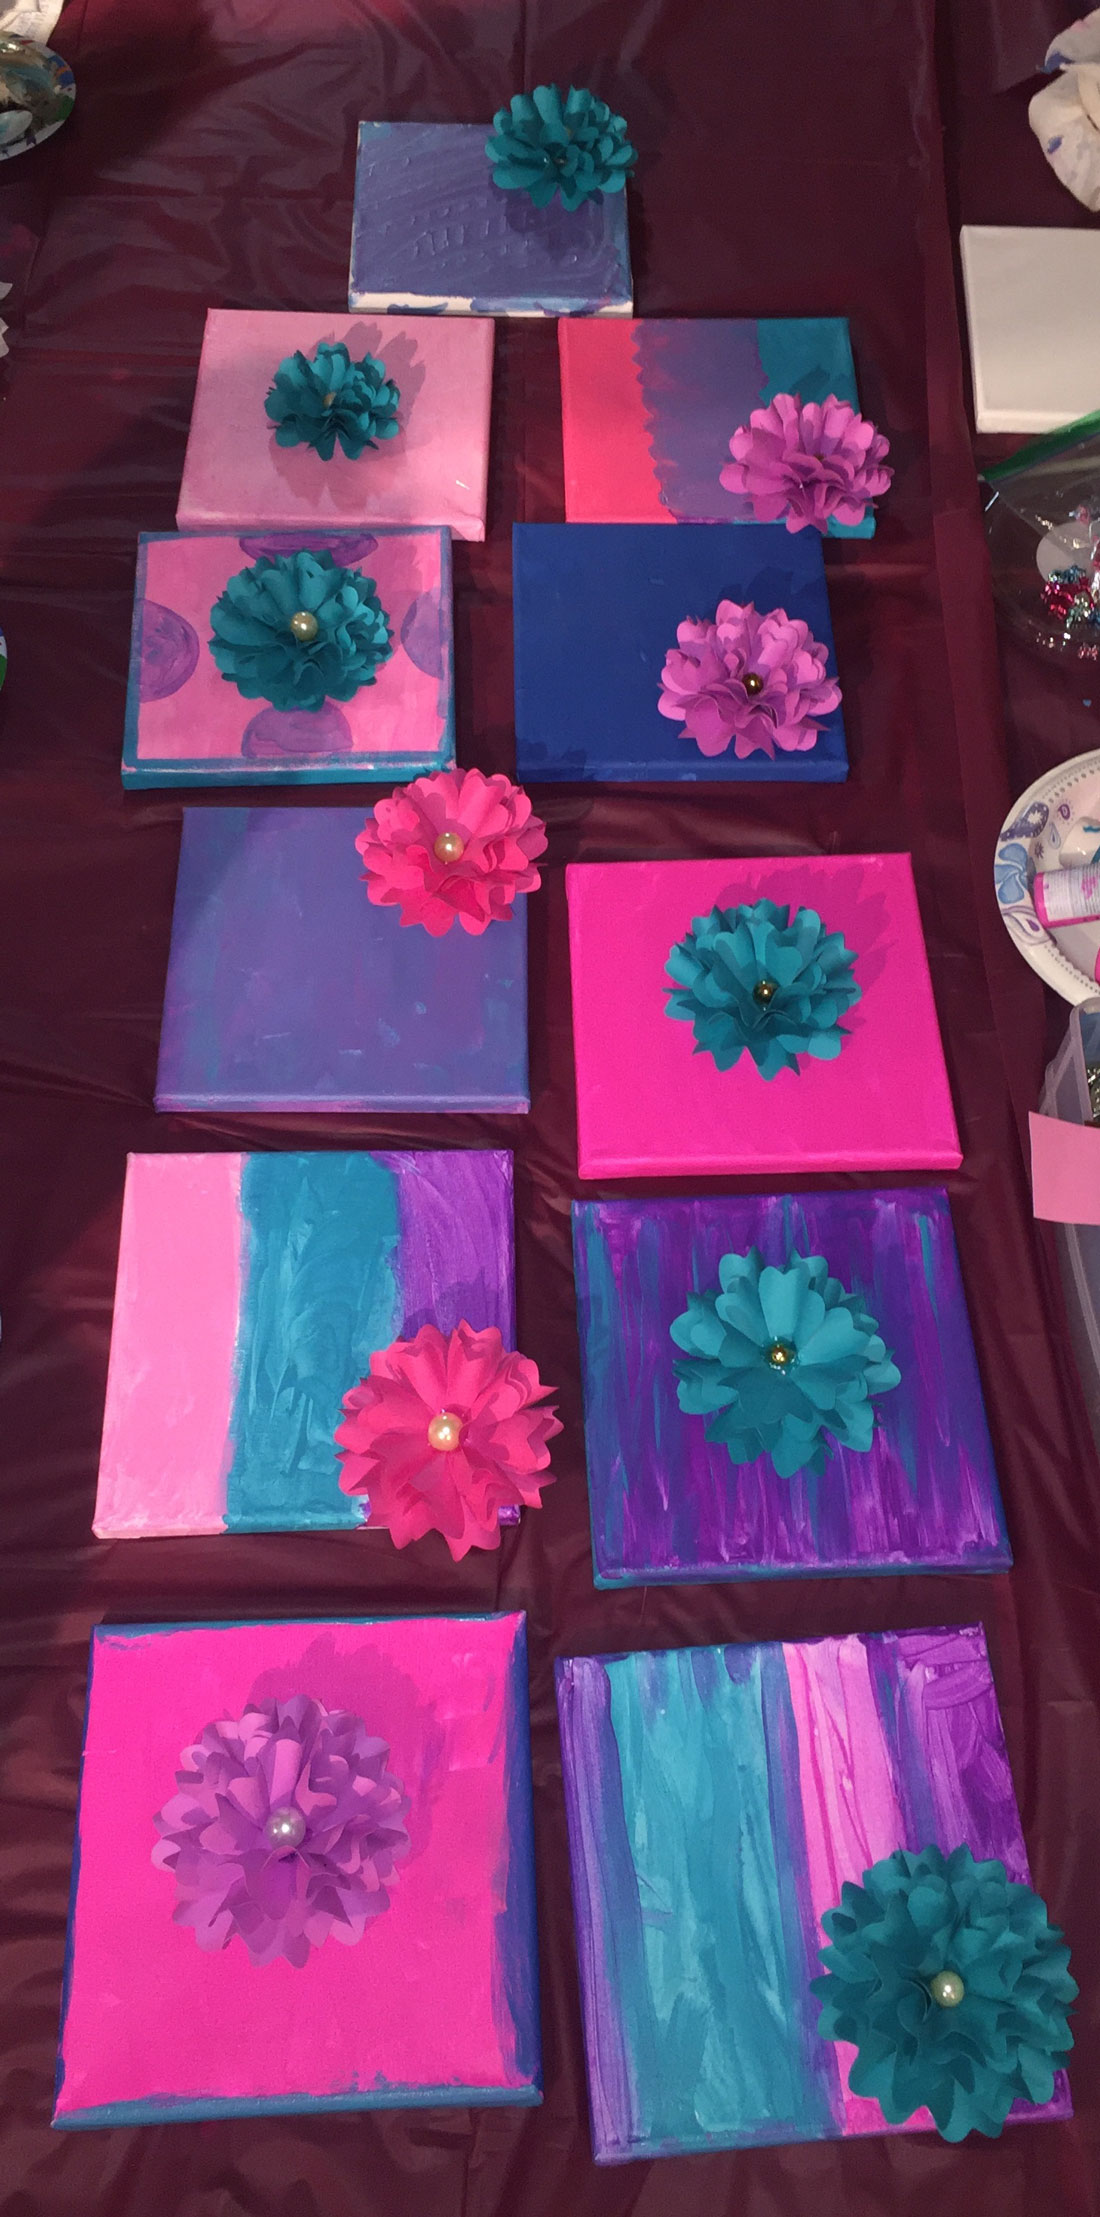 Fun Acrylic Painting Birthday Activity - painted canvas and paper flower final creations